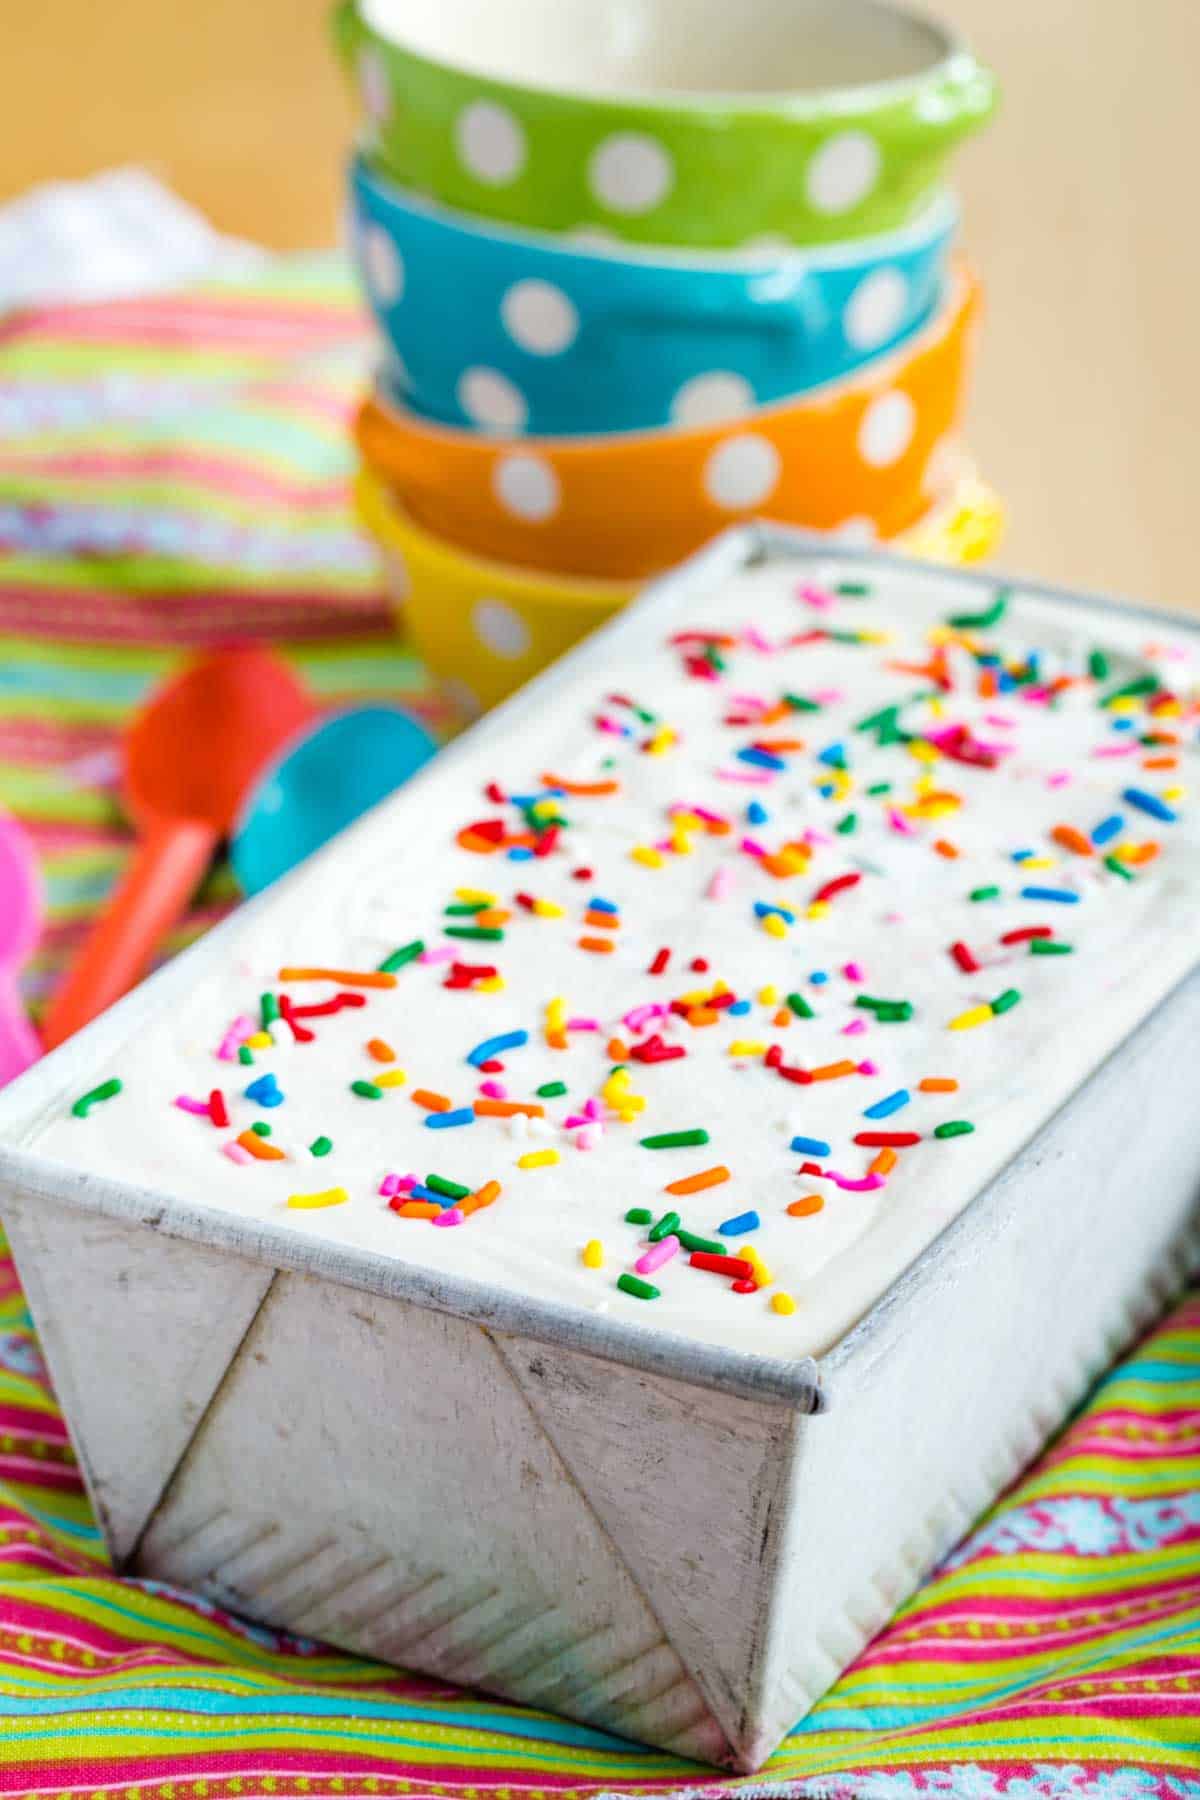 A batch of homemade Ice Cream with rainbow sprinkles scattered over the top in a pan with polka dot bowls in the background.